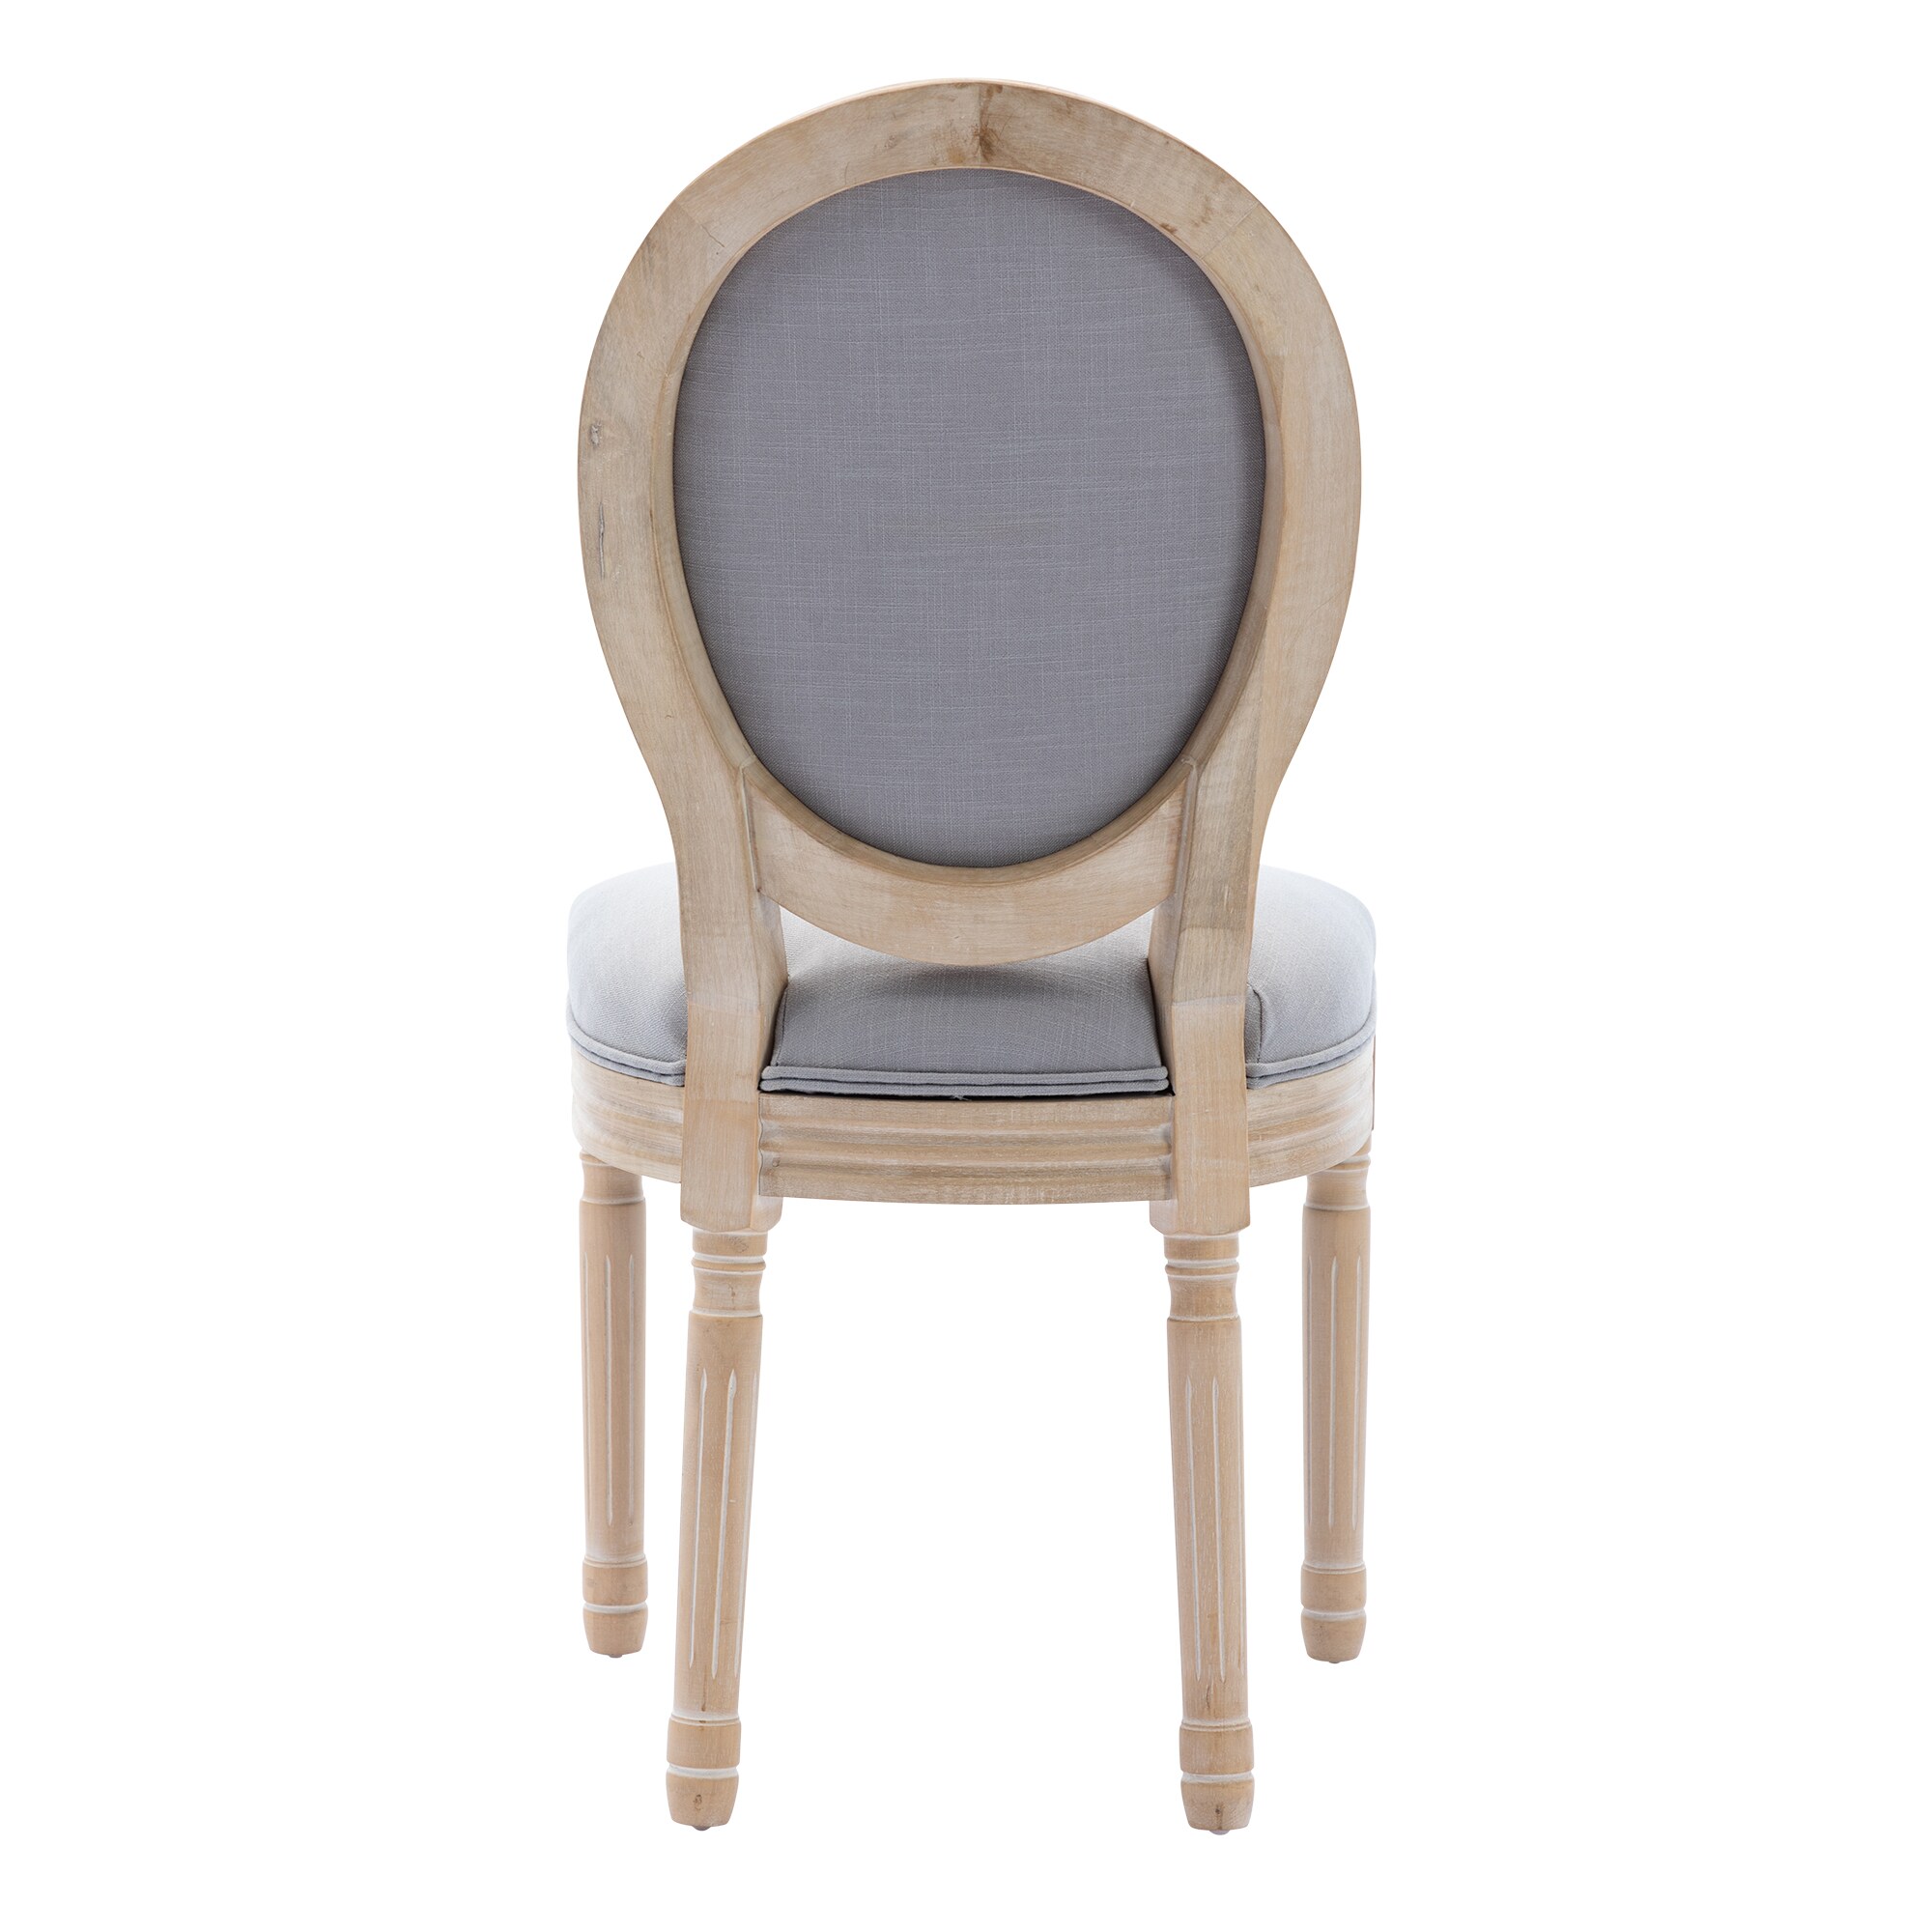 Home Craft Decor Louis French Antique Wood Tufted Oval Dining Chair Beige